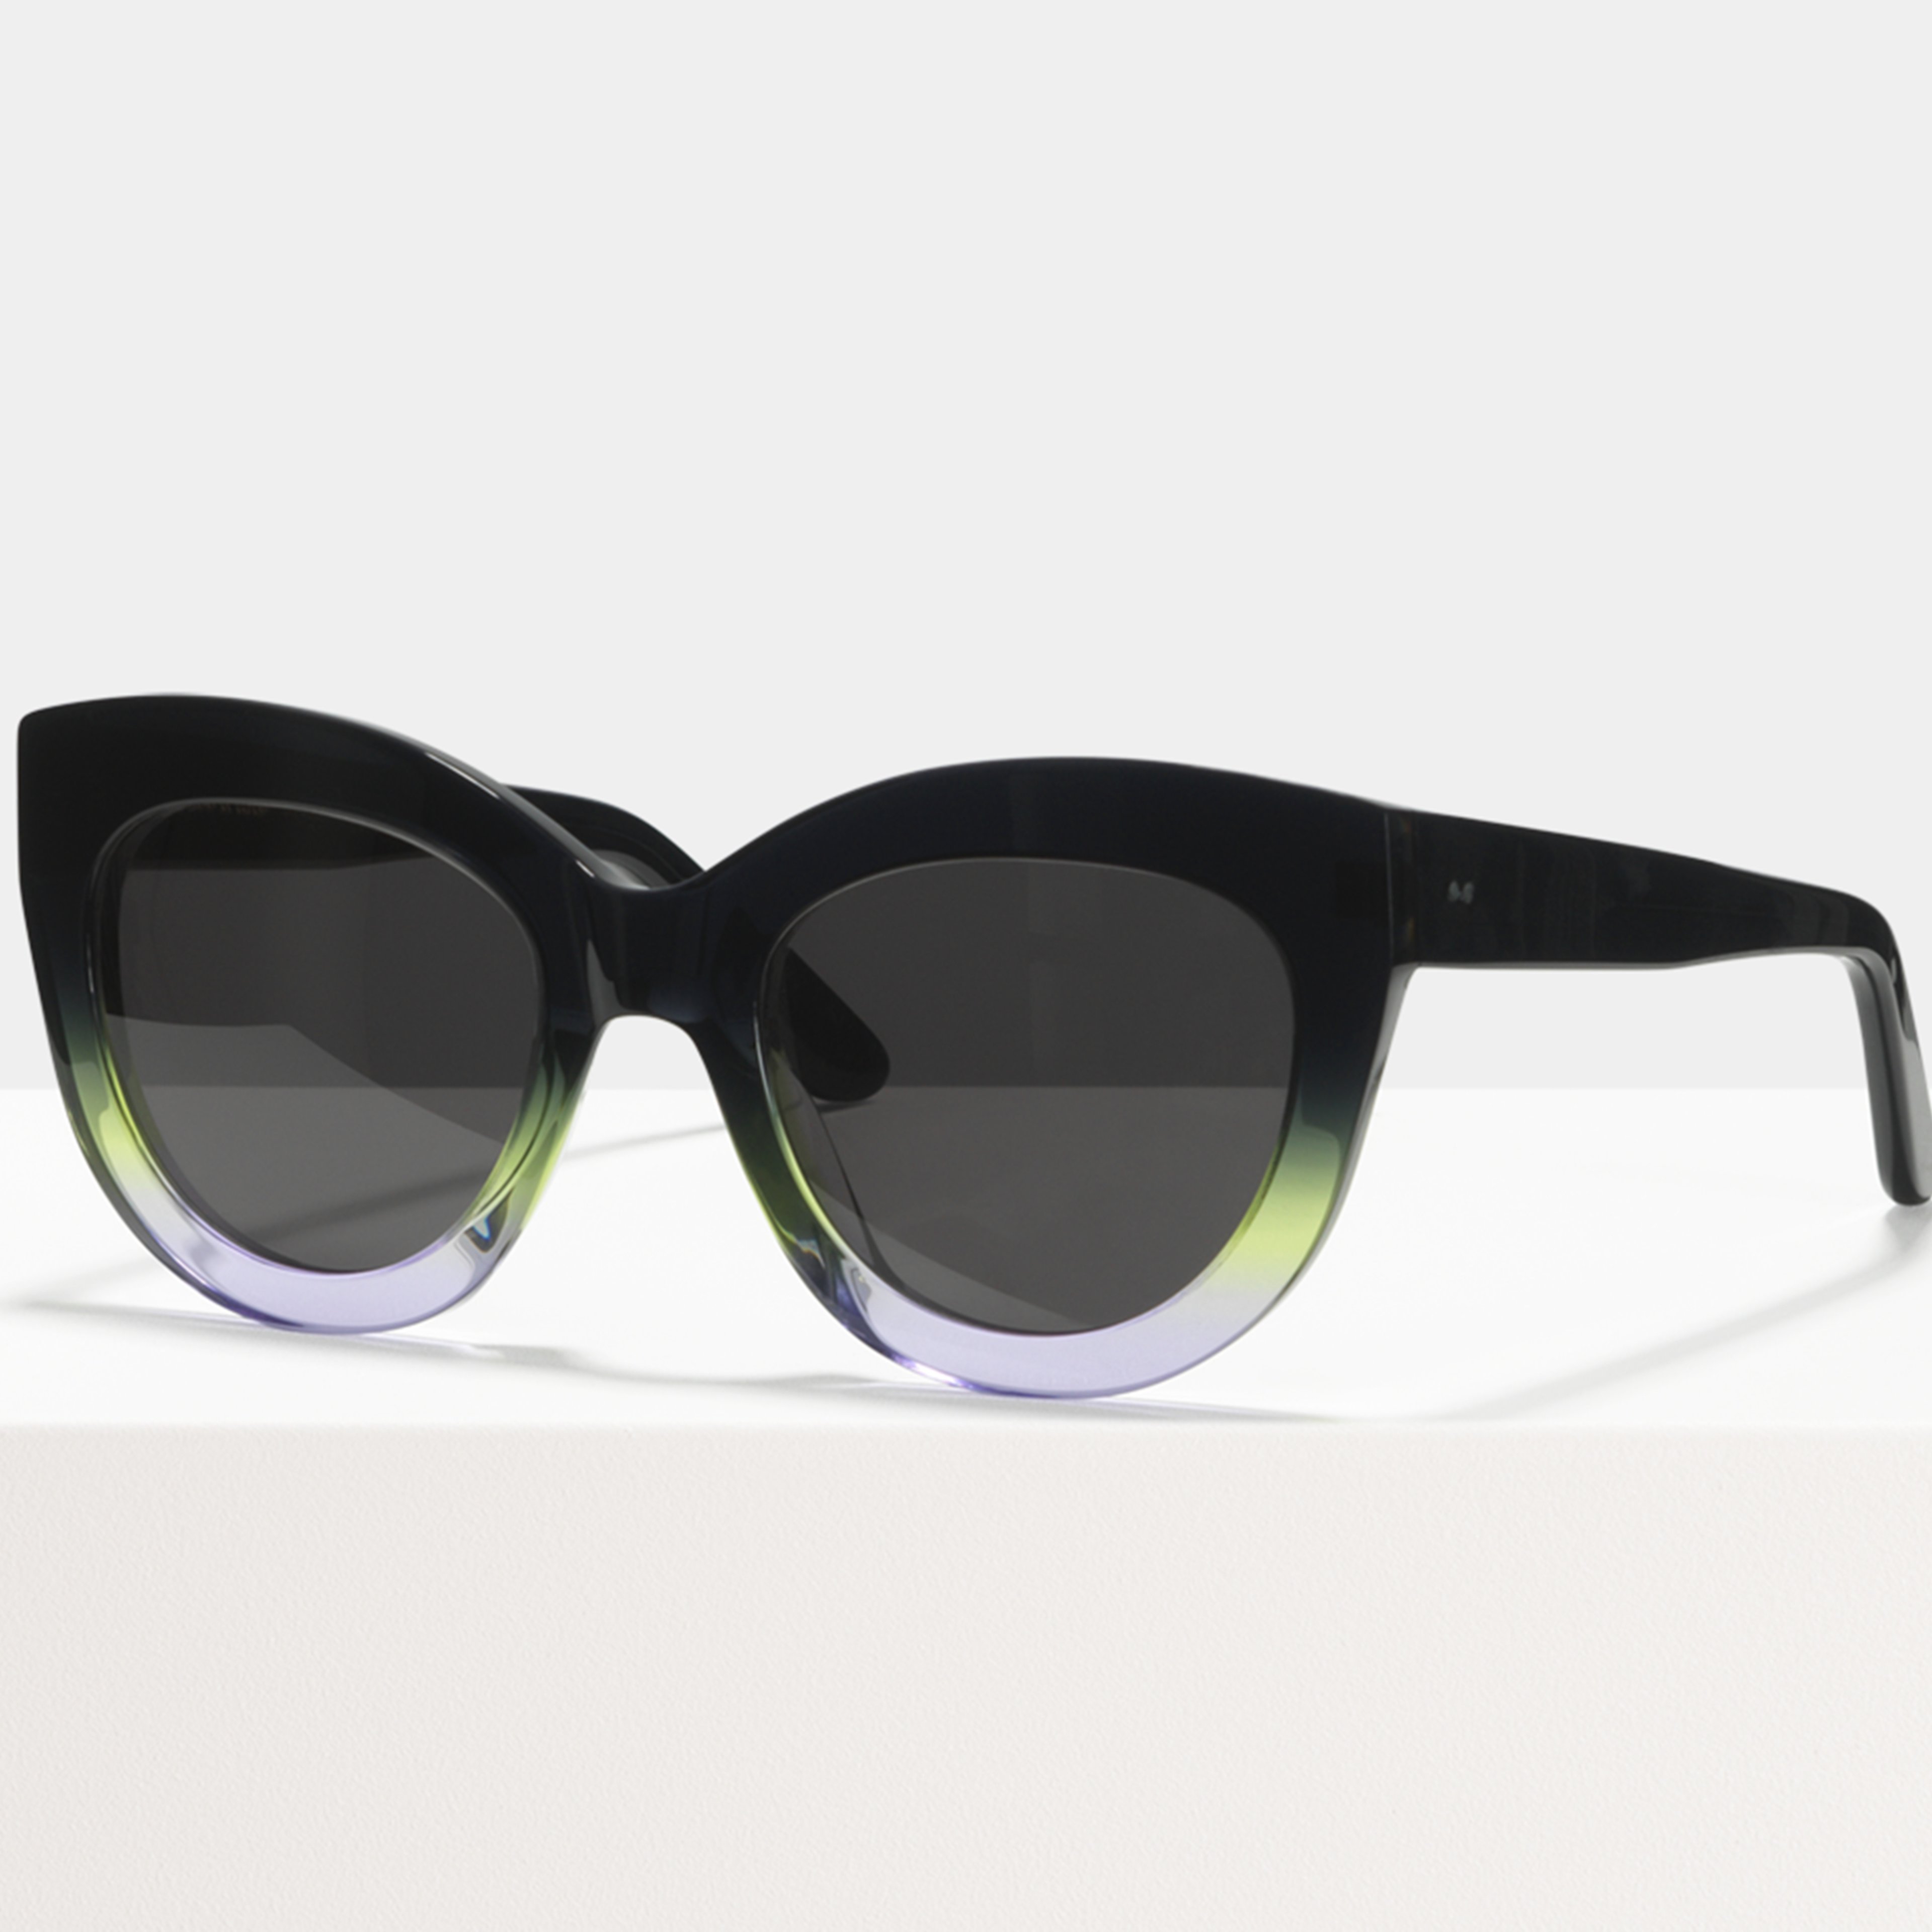 Ace & Tate Solaires |  Acétate in Marron, Vert, Violet